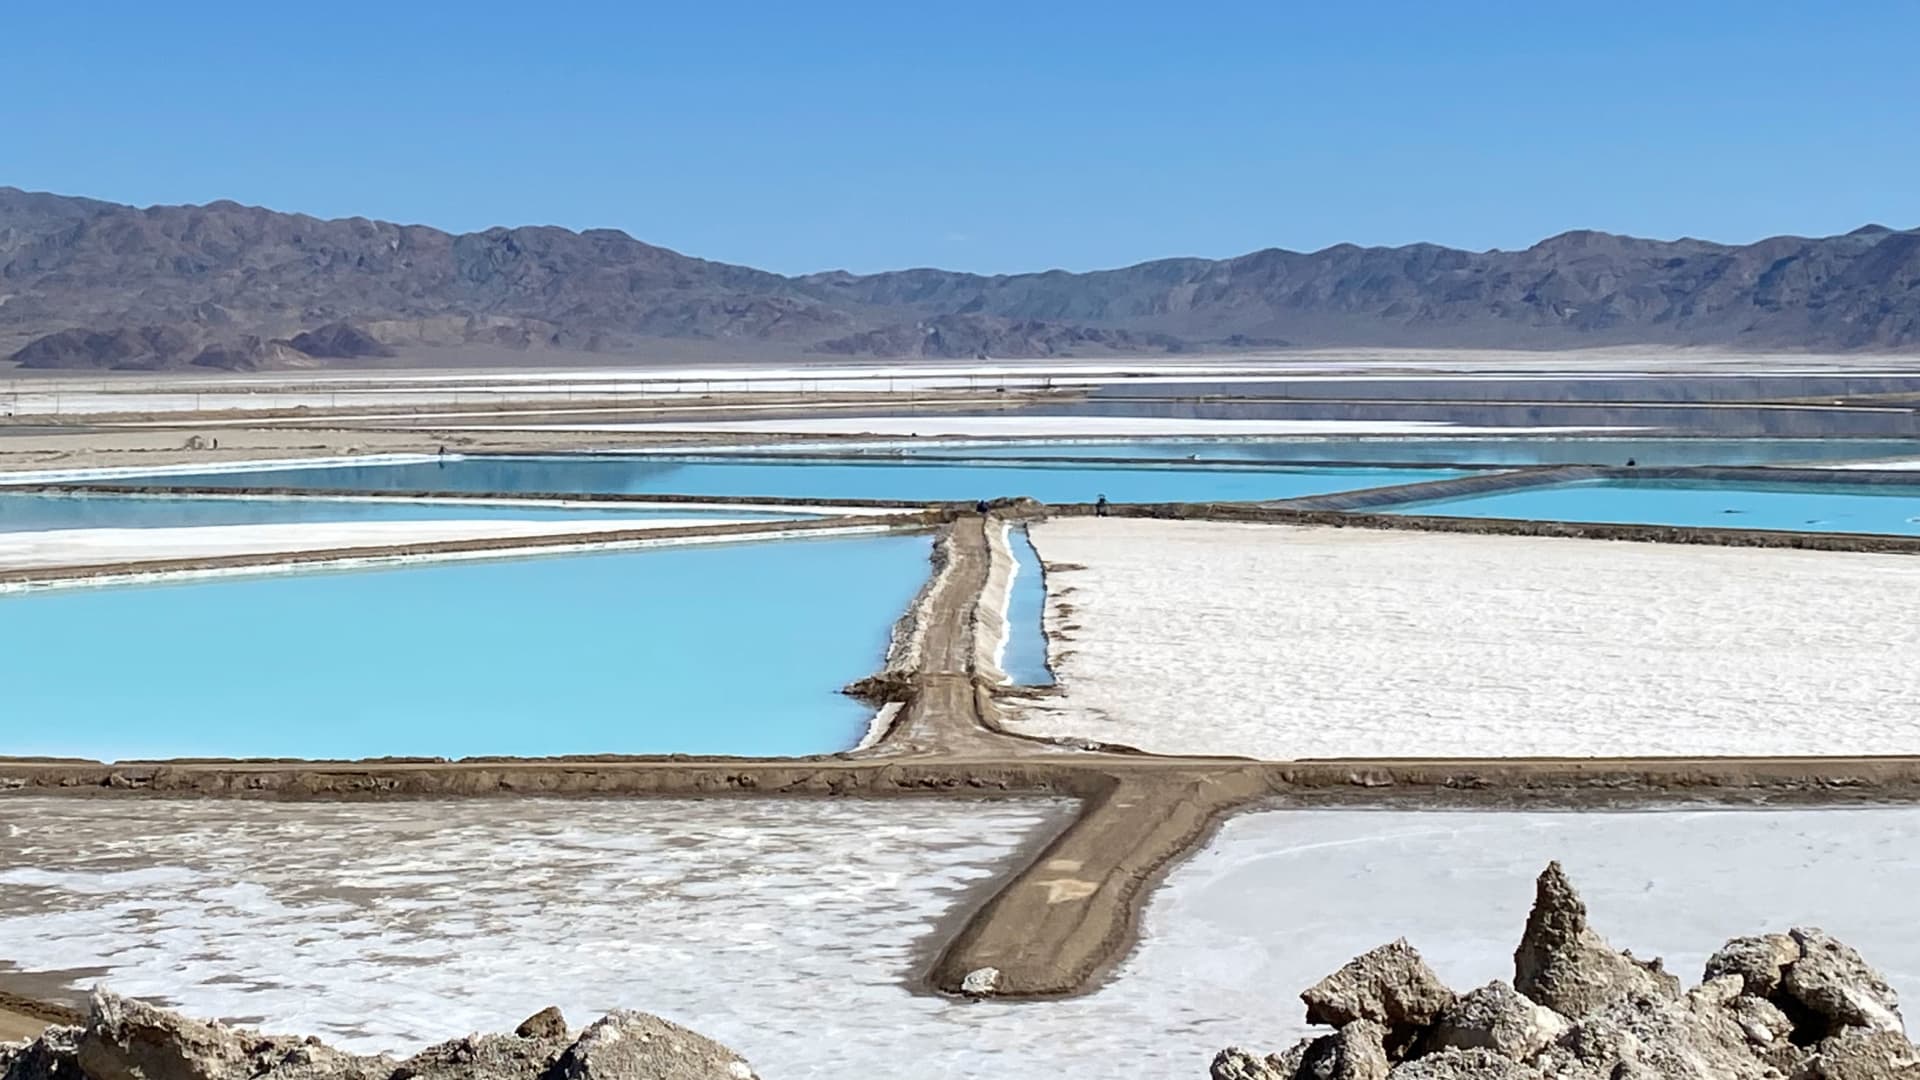 Inside the only lithium producer in the U.S., which provides the critical mineral used in batteries by Tesla, EV makers Auto Recent